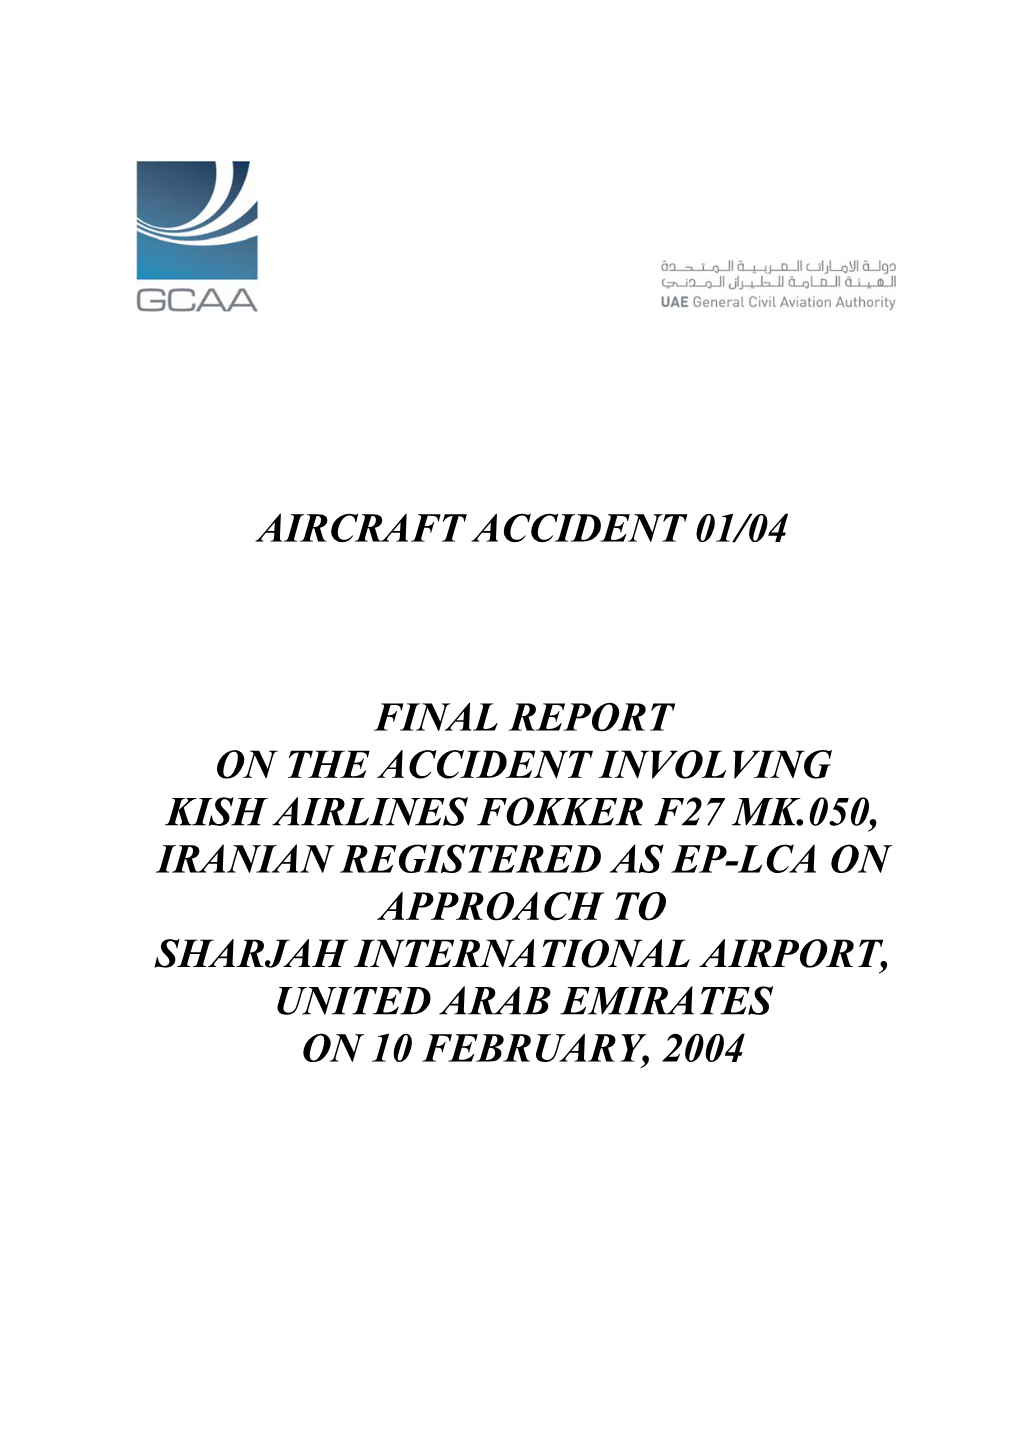 Aircraft Accident 01/04